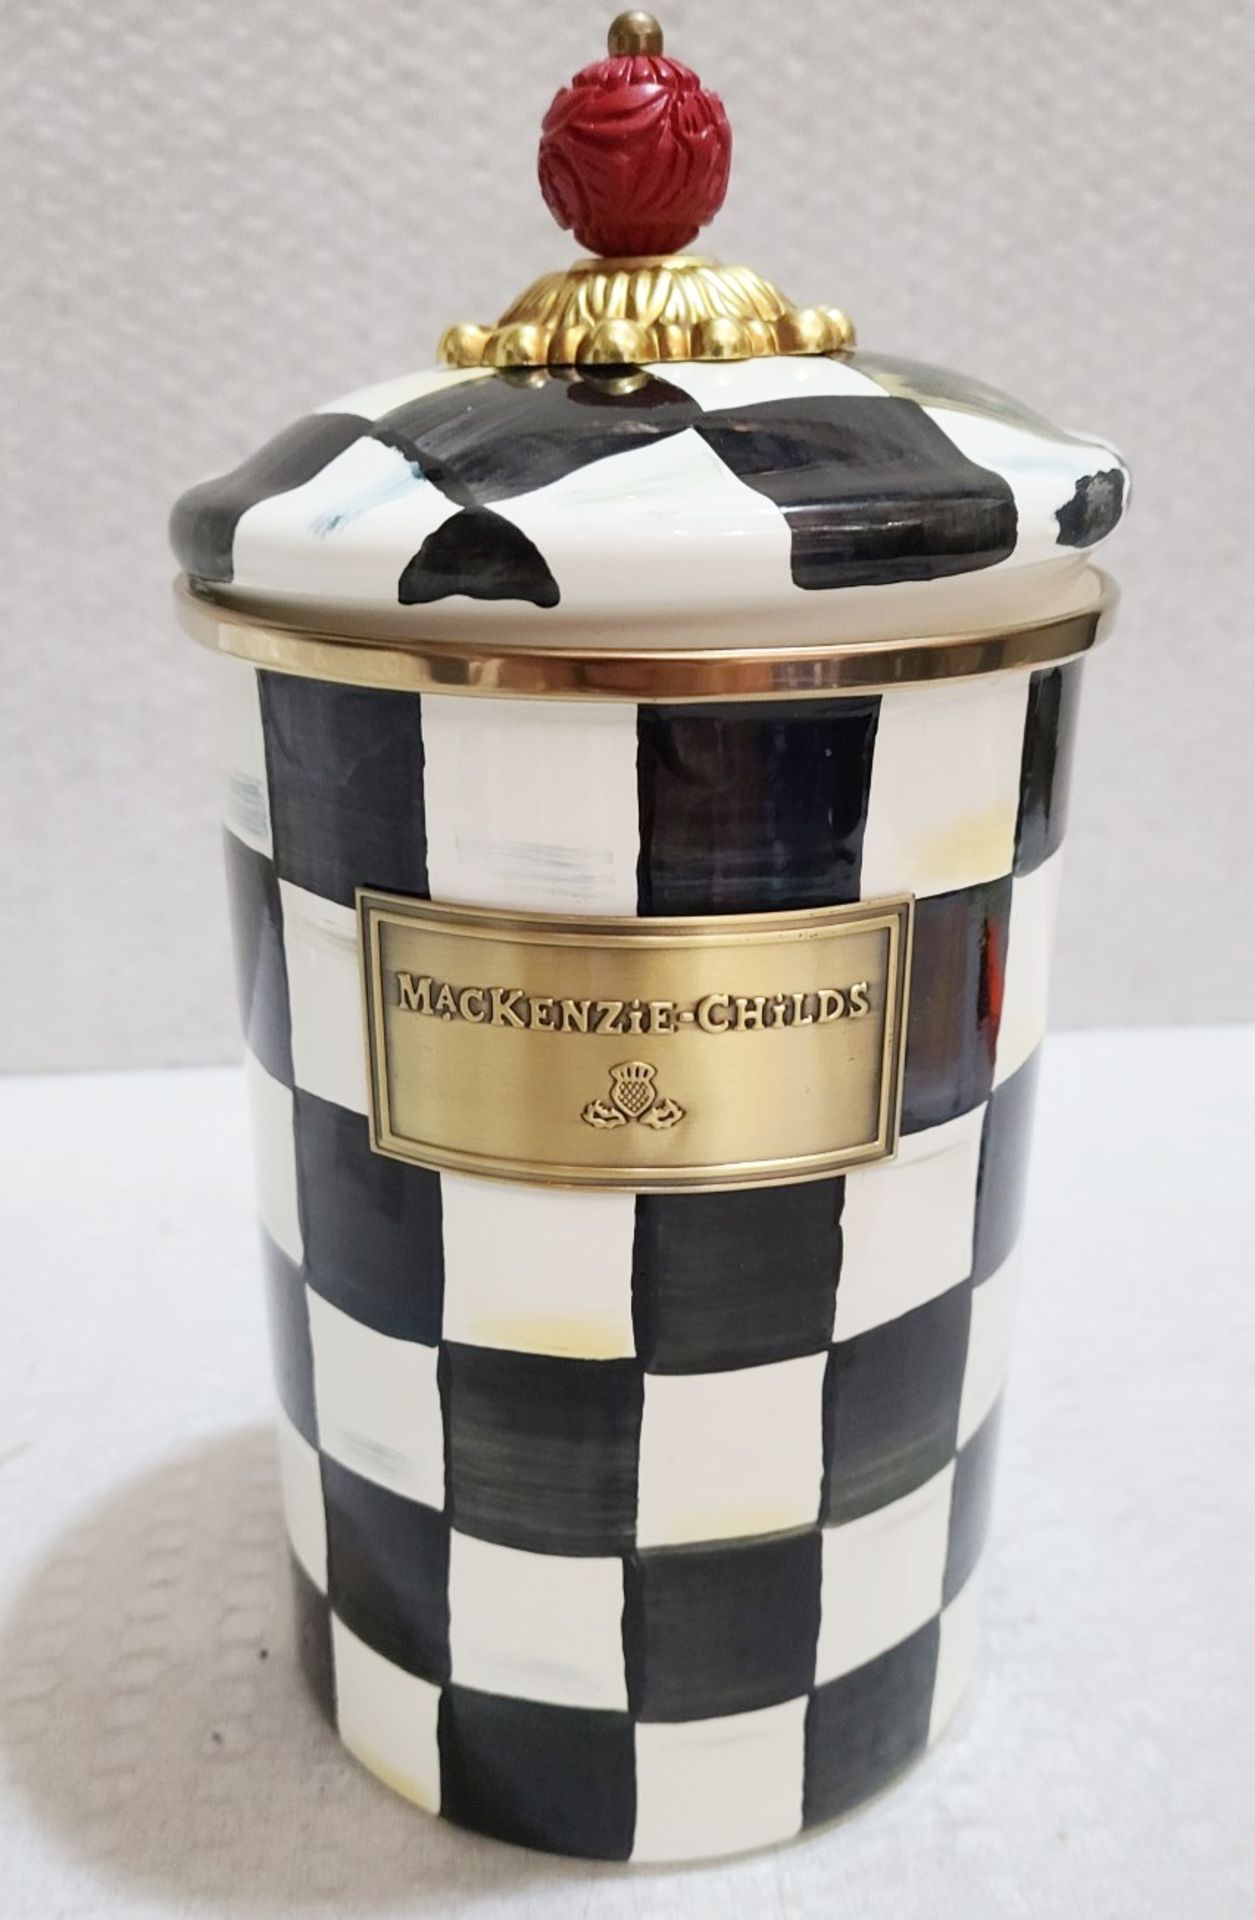 1 x MACKENZIE CHILDS Large Courtly Check Enamel Canister - Original Price £131.00